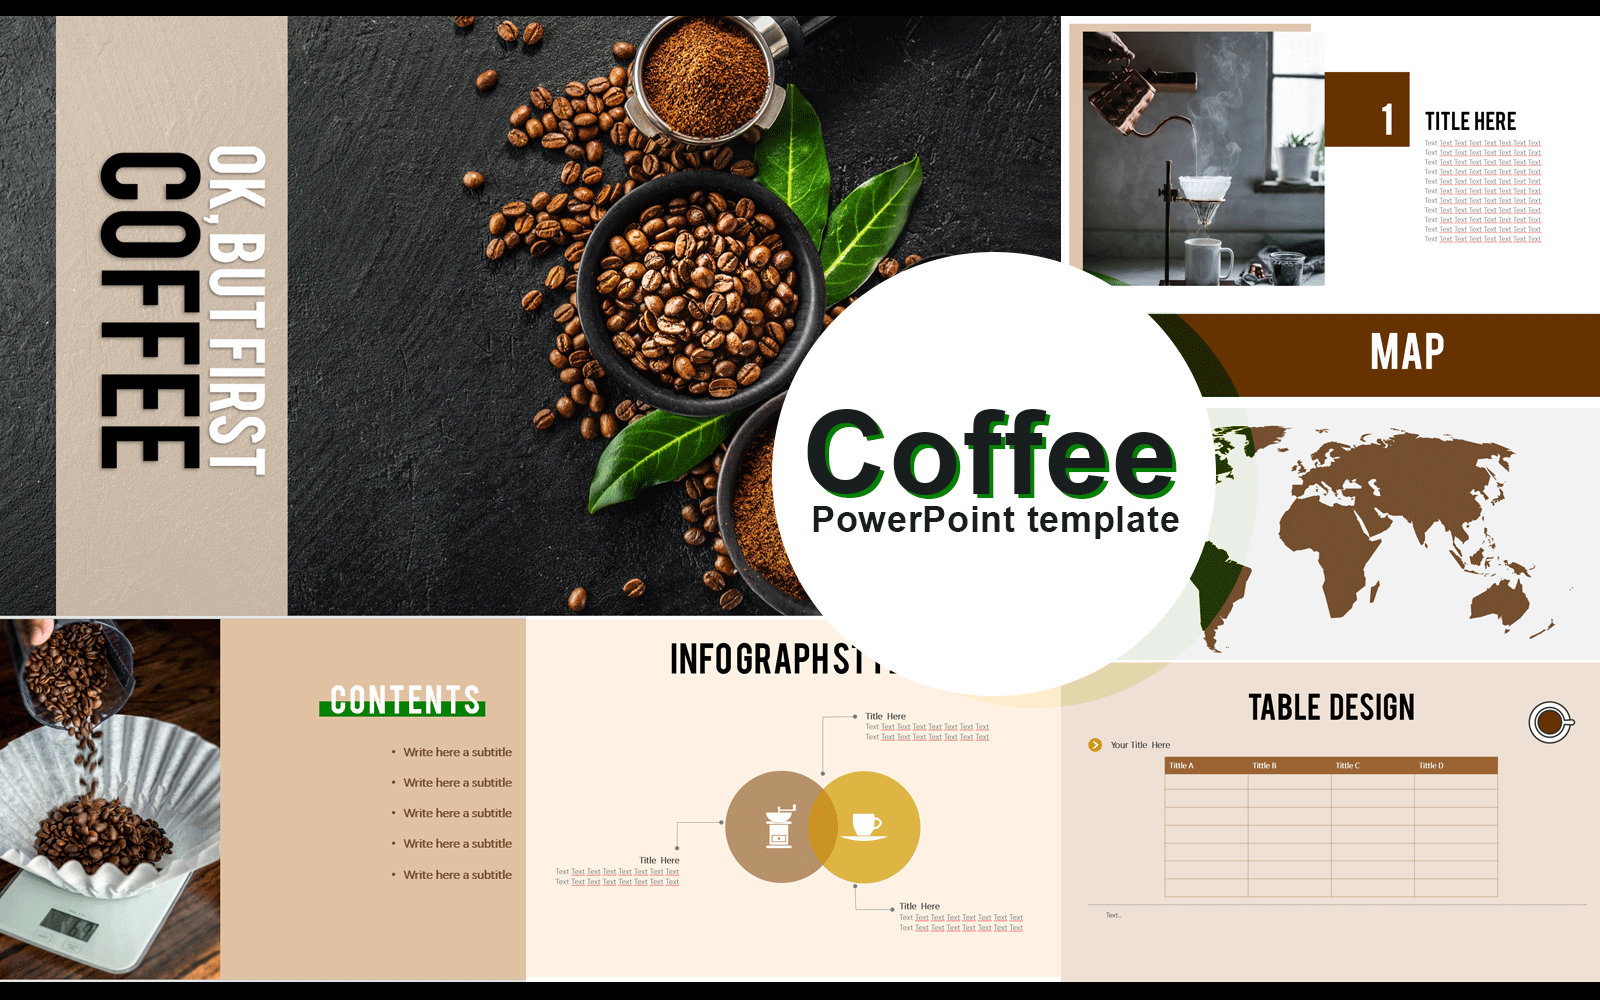 soft-drinks-powerpoint-templates